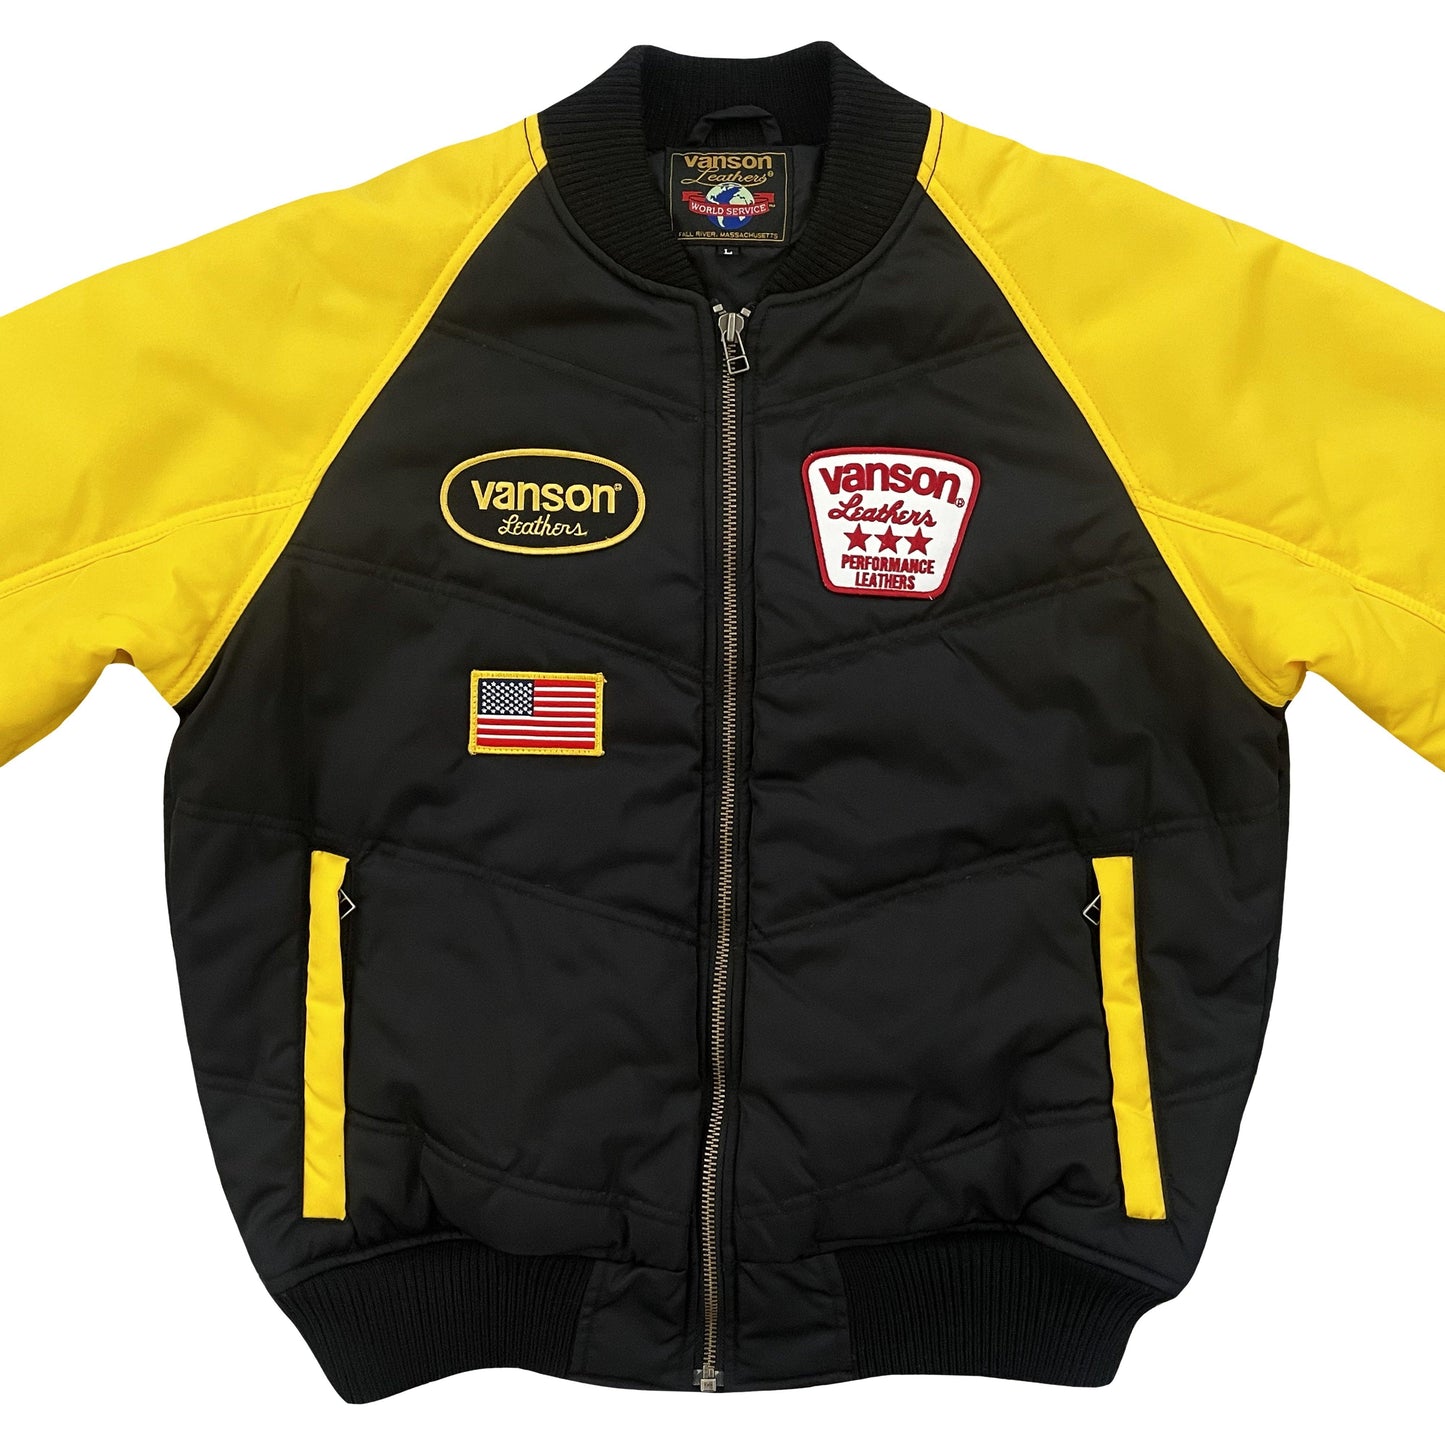 Vanson Leathers Bomber Jacket - Known Source